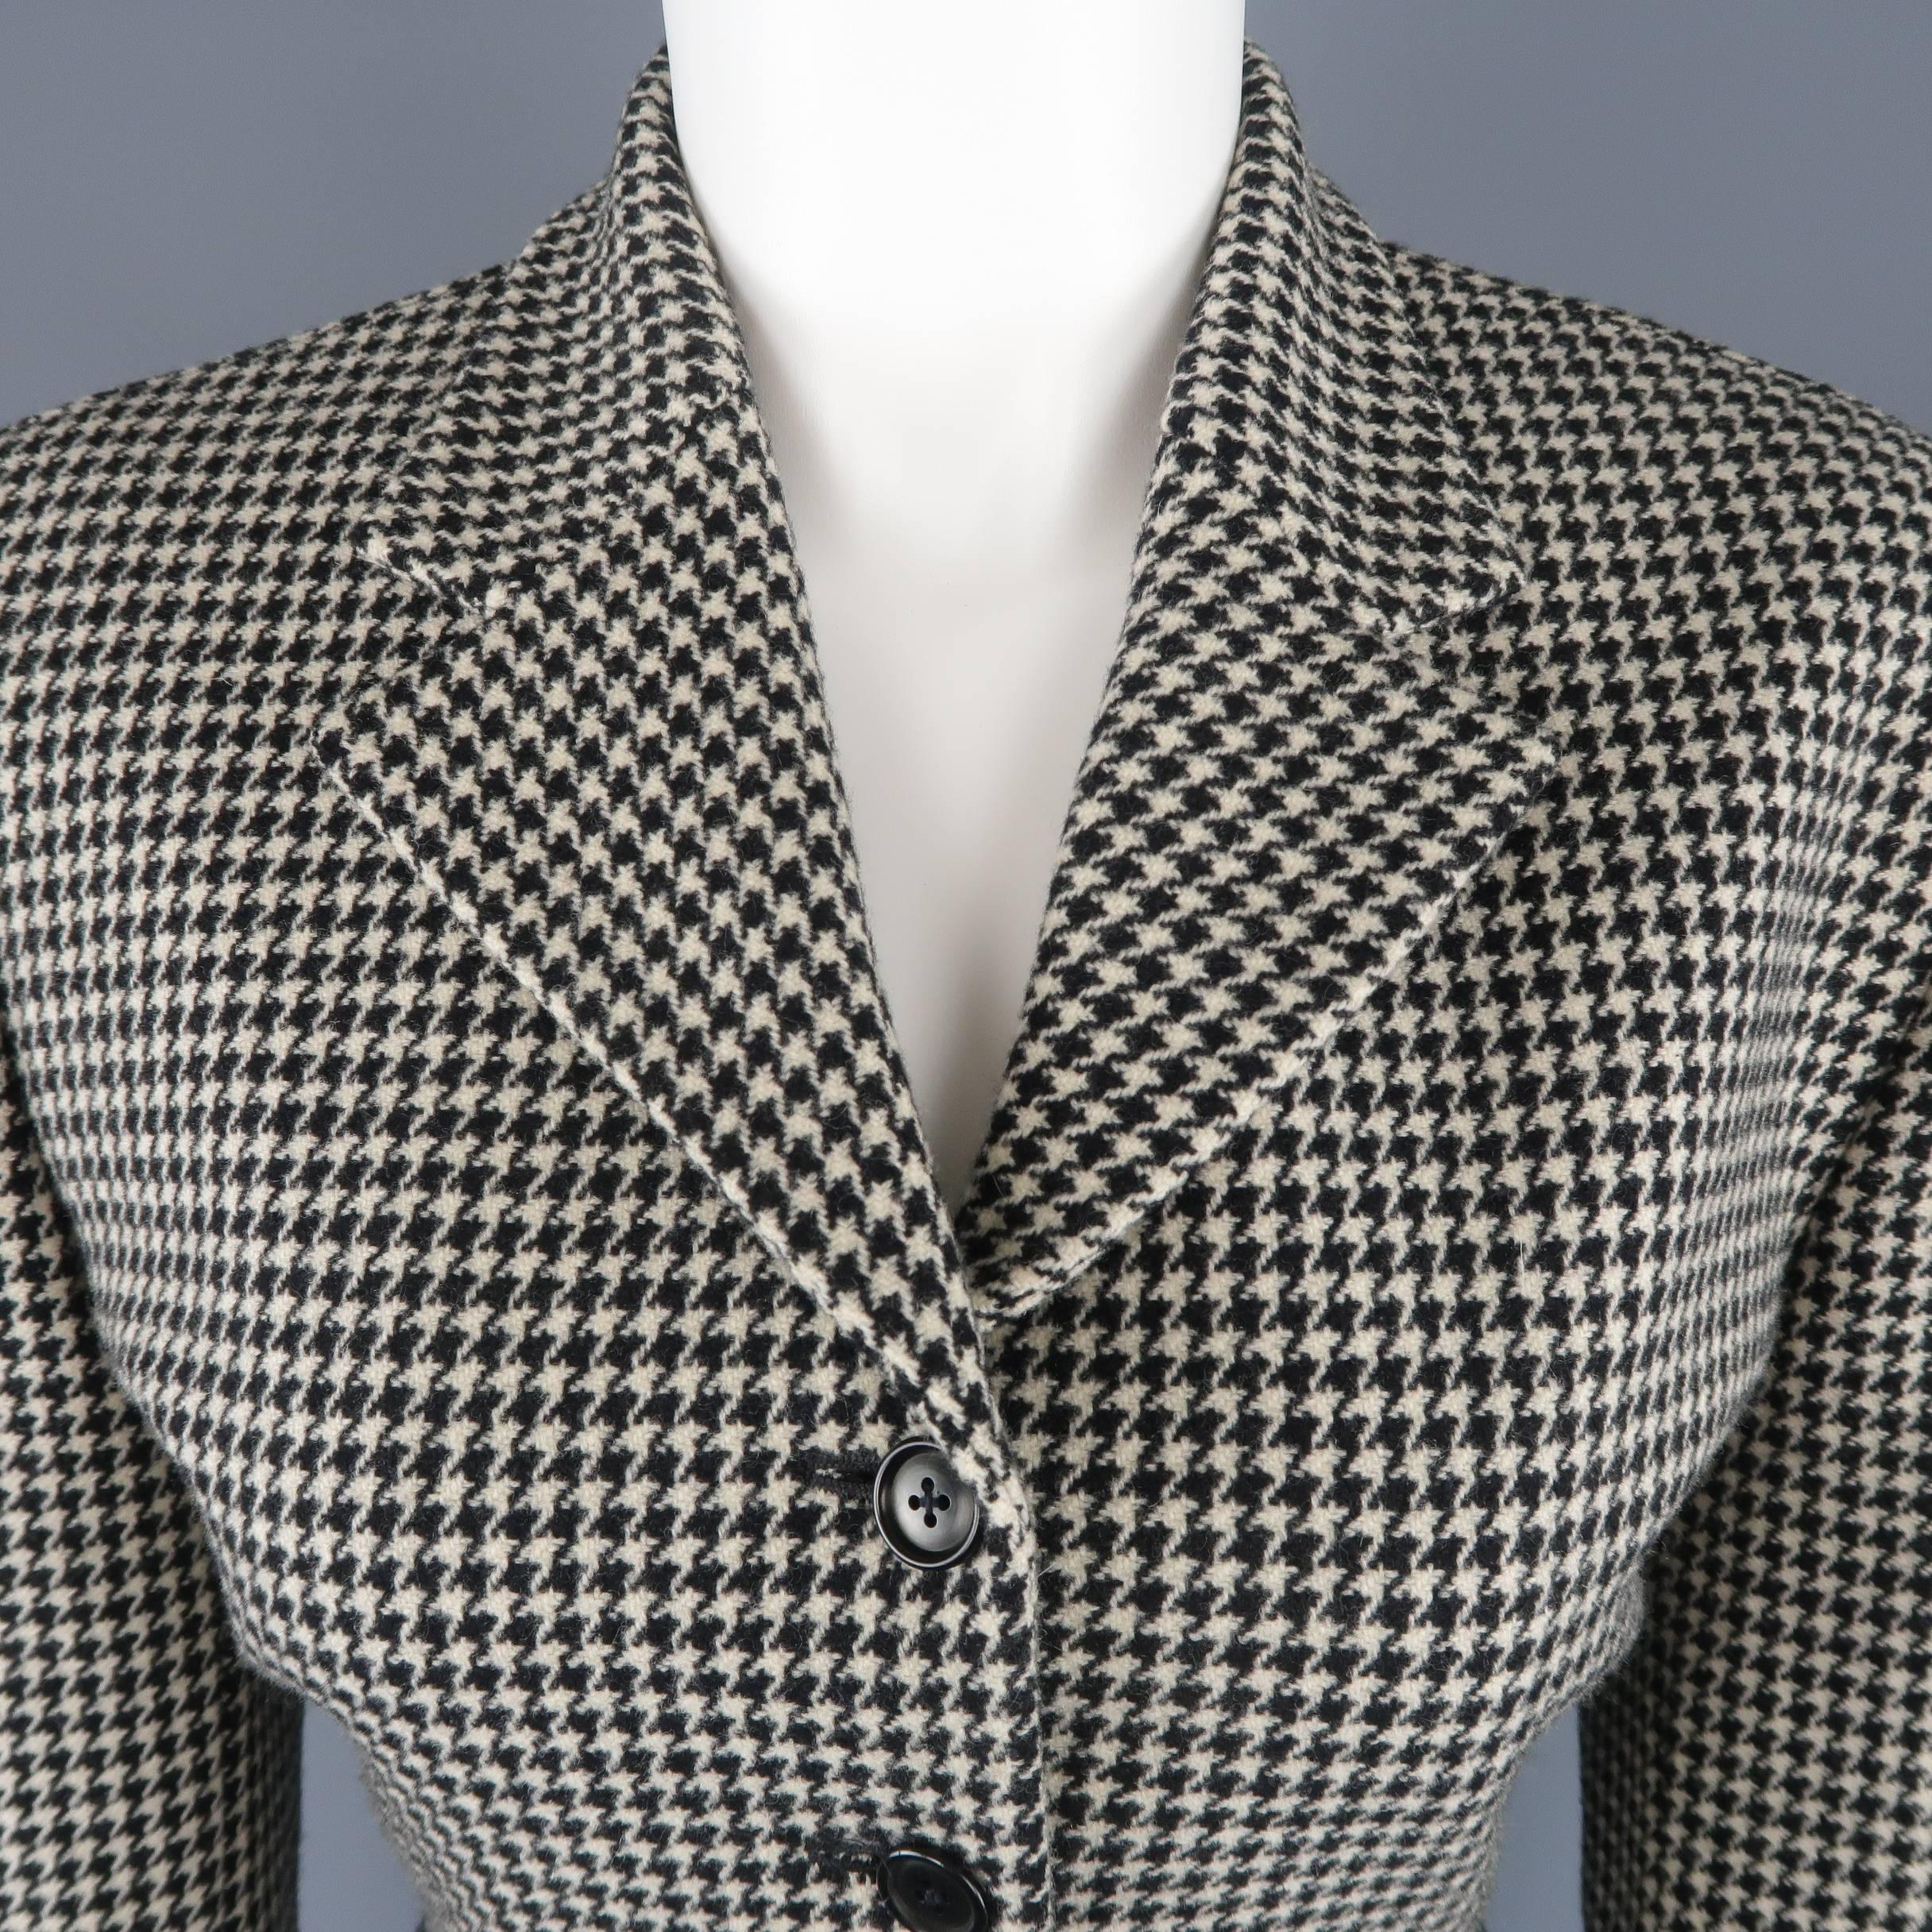 RALPH LAUREN COLLECTION jacket comes in cream and black houndstooth wool cashmere blend fabric with a notch lapel, padded shoulder, four button front, and cropped silhouette. Mad in USA.
 
Excellent Pre-Owned Condition.
Marked: 10
 
Measurements:
